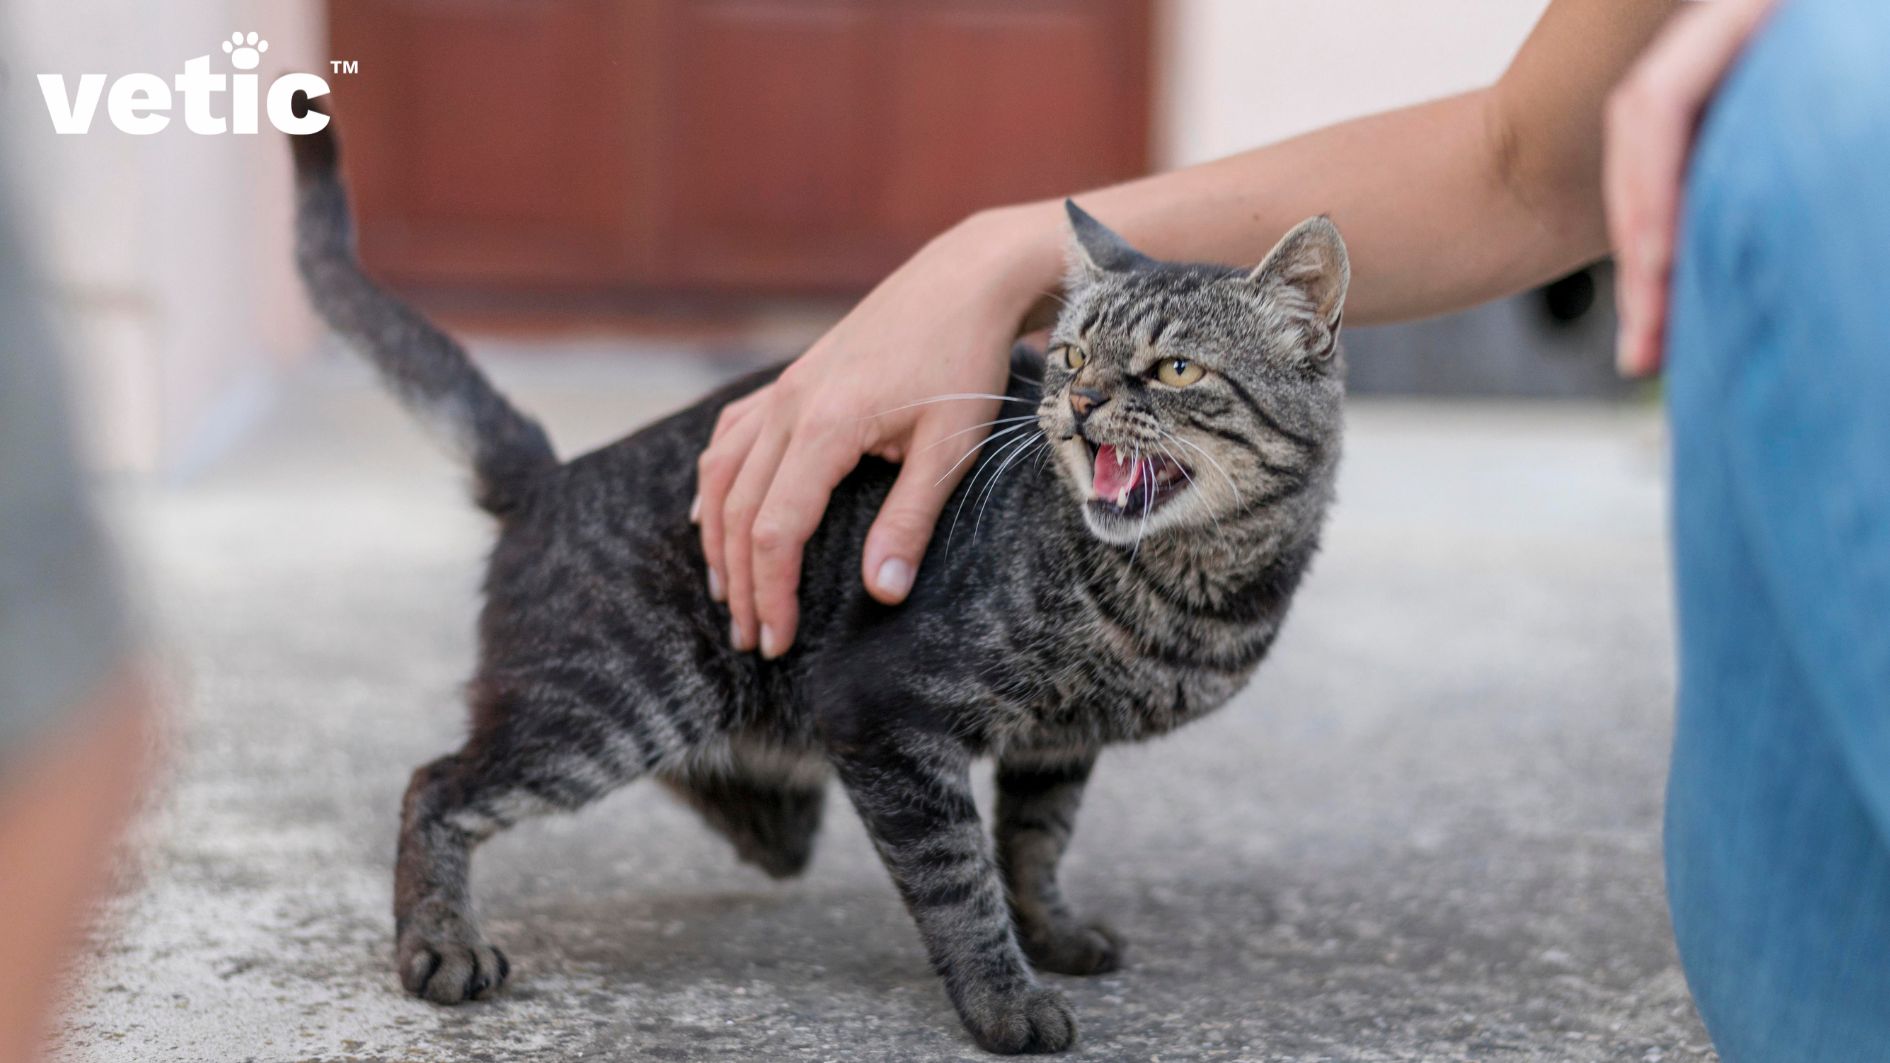 A grey and black mackerel cat hissing at someone outside the photo. only a hand holding the cat gently is visible. not neutering cats can result in unwarranted aggressive behaviors